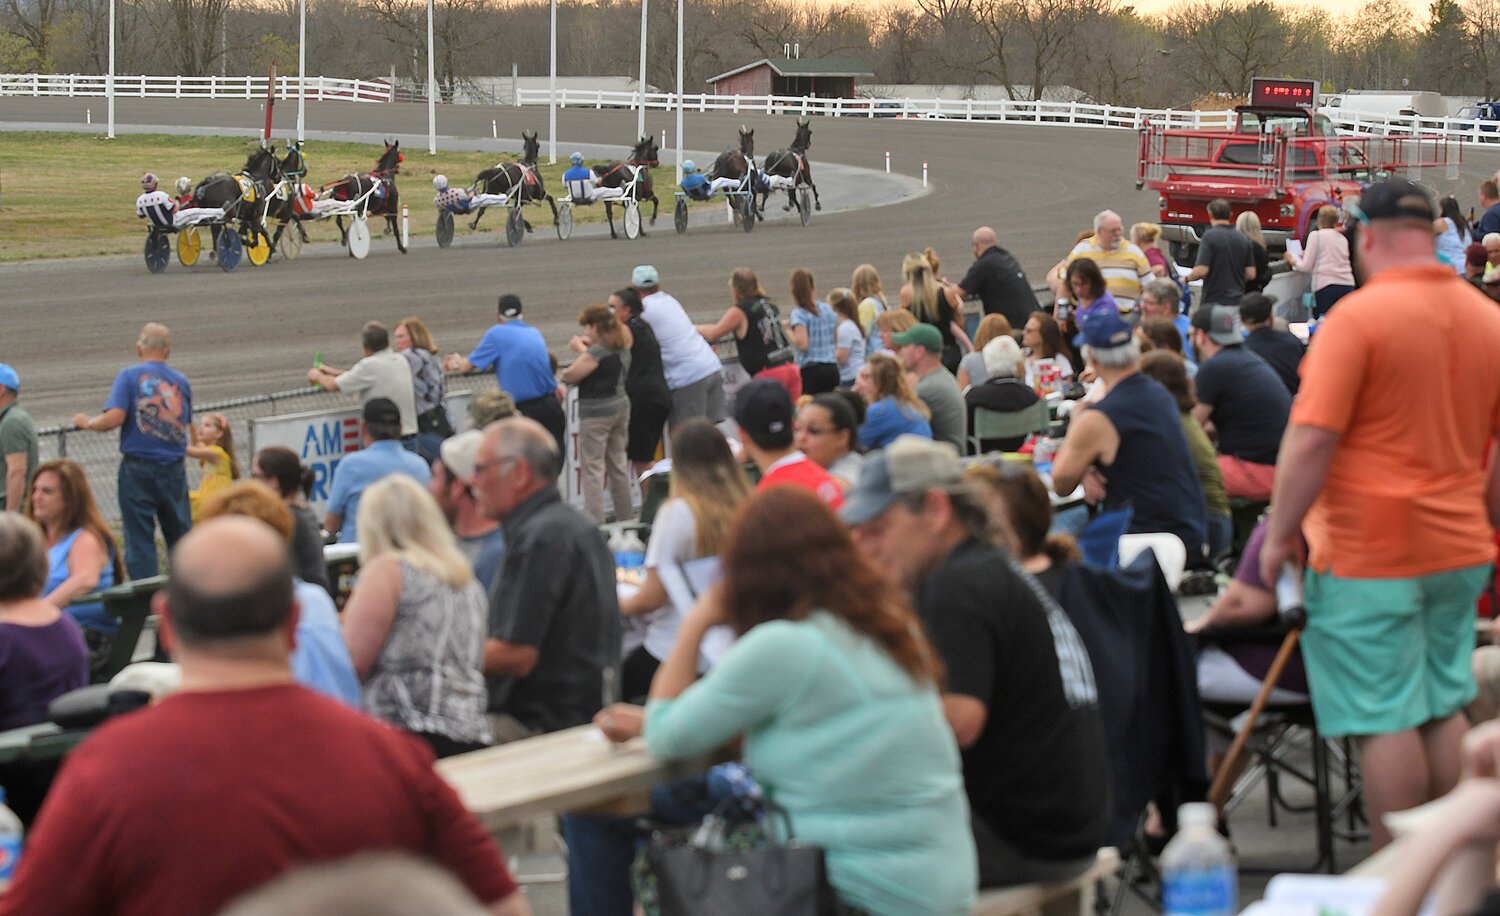 A crowd of over 1,700 spectators watch a race at Vernon Downs on Saturday, April 15, during the historic racetrack’s 70th season opener.